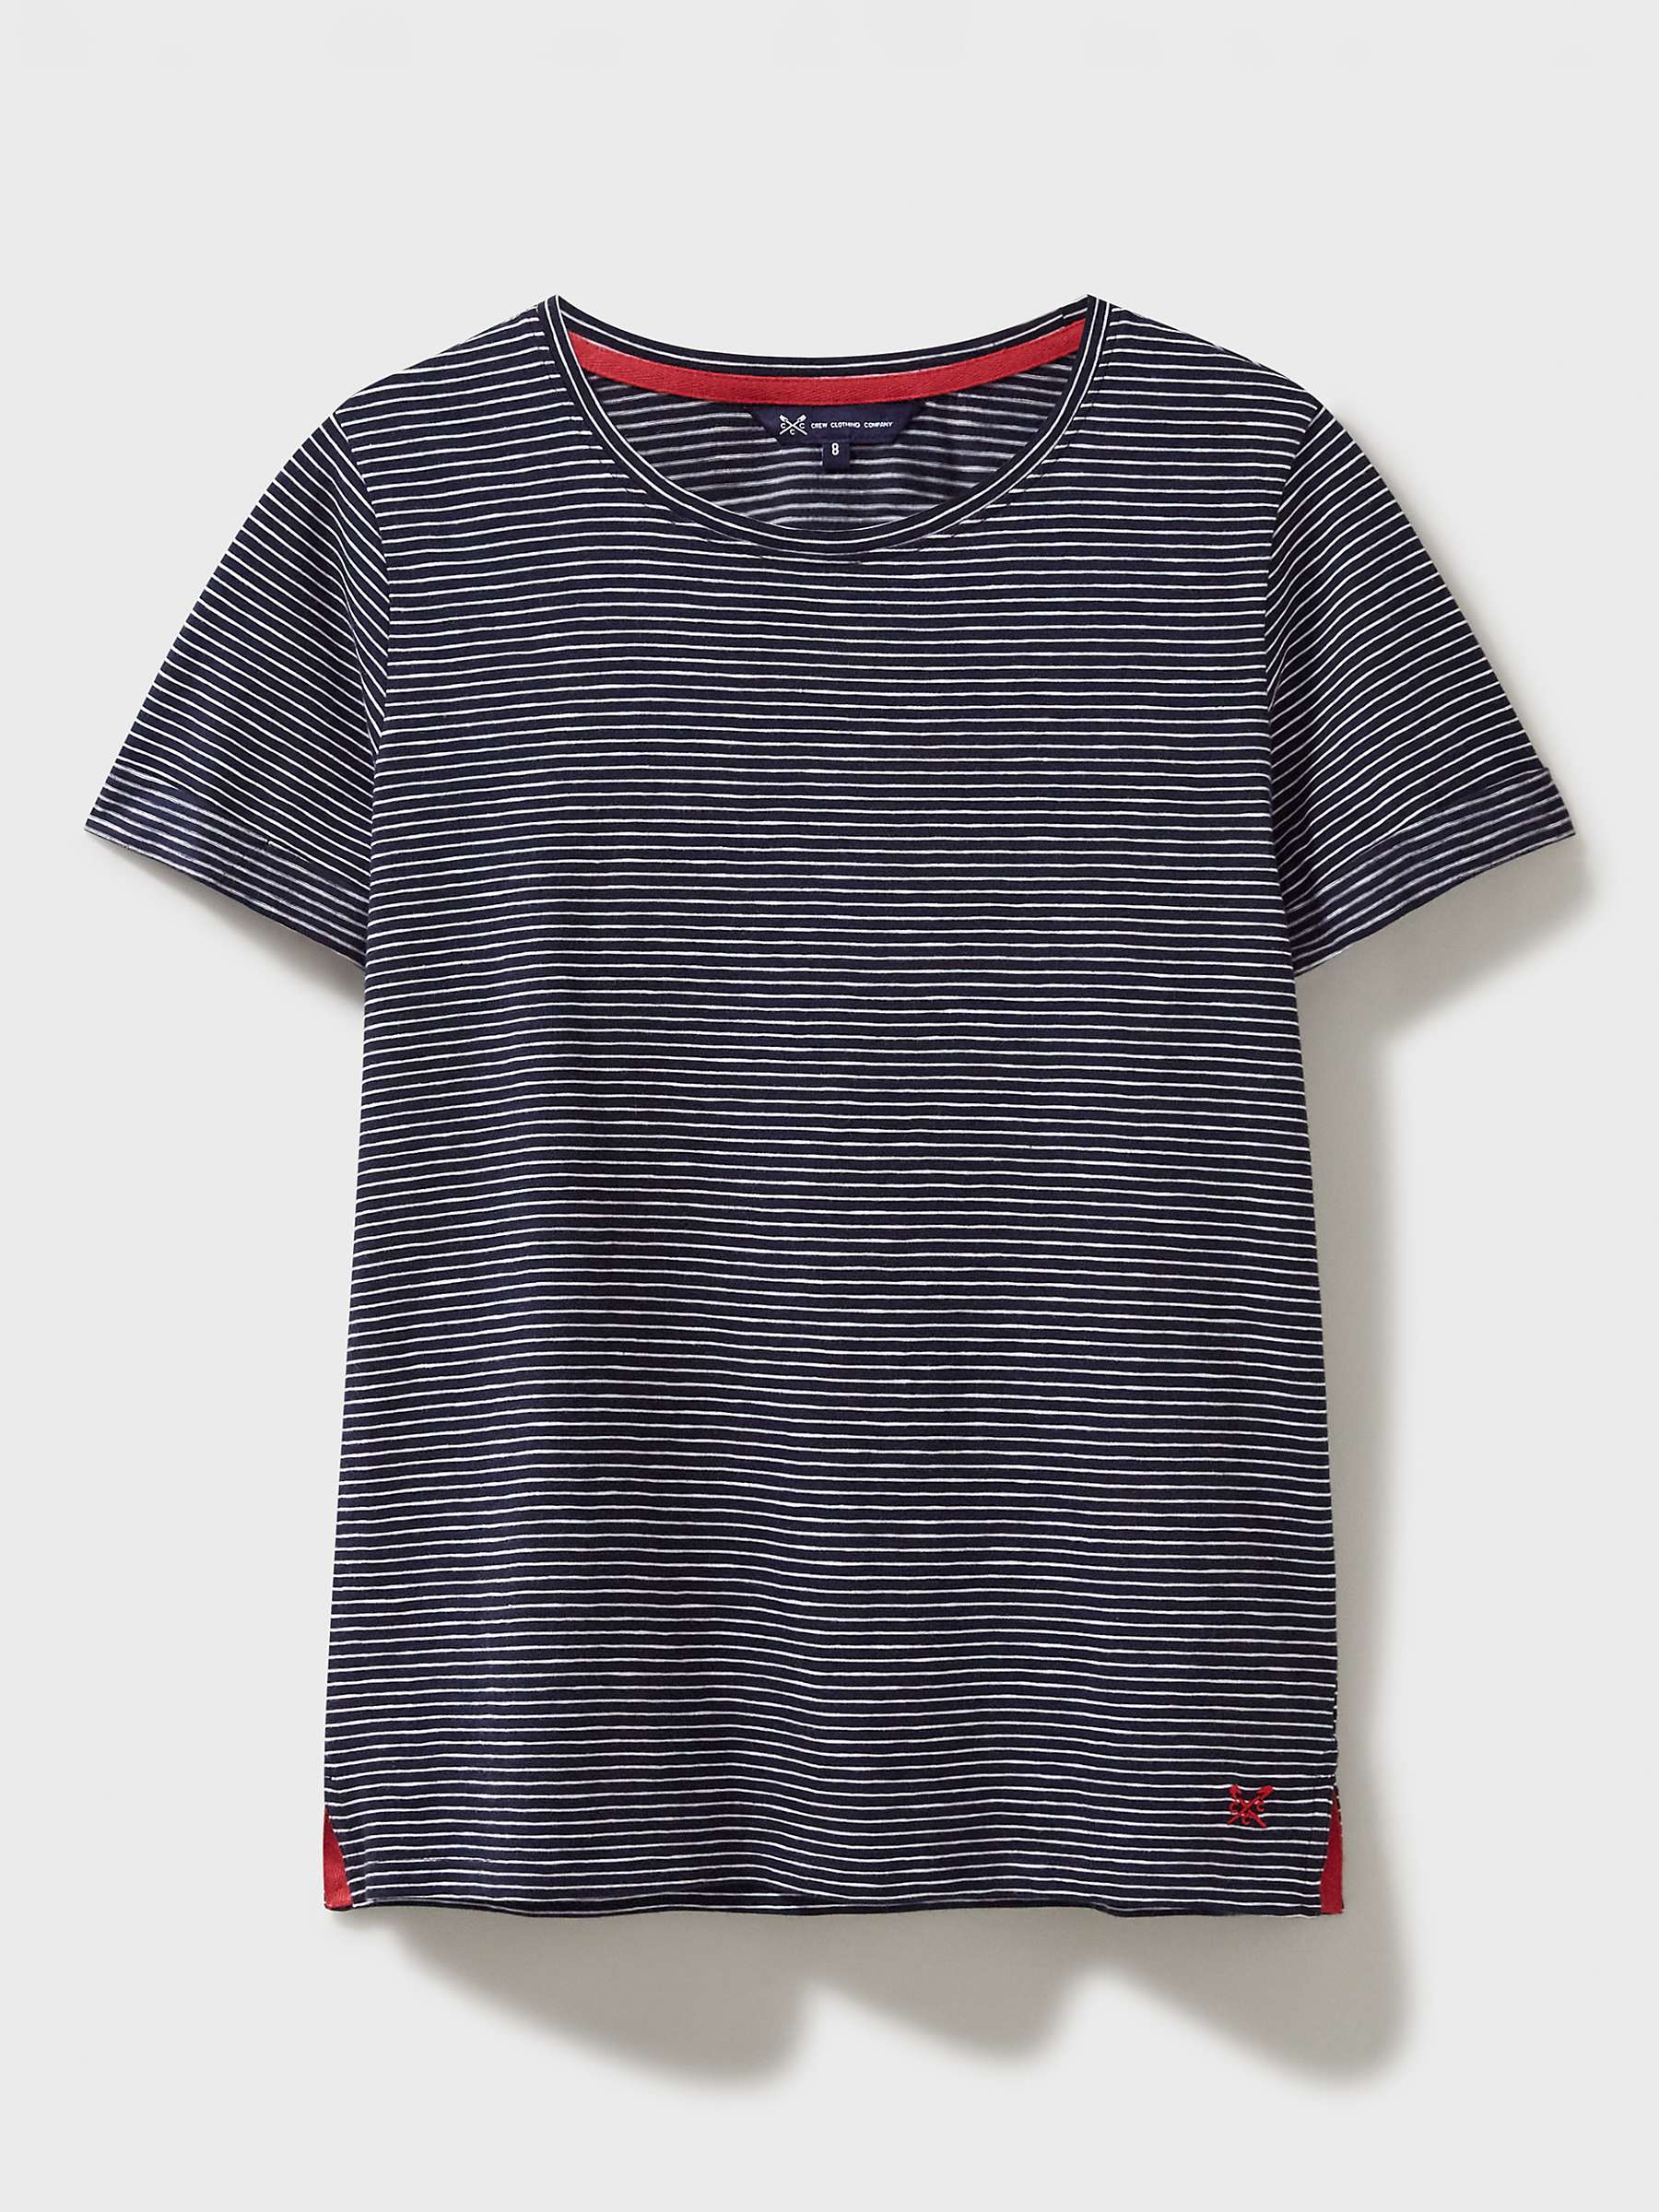 Buy Crew Clothing Crew Neck Striped T-Shirt, Multi Blue Online at johnlewis.com